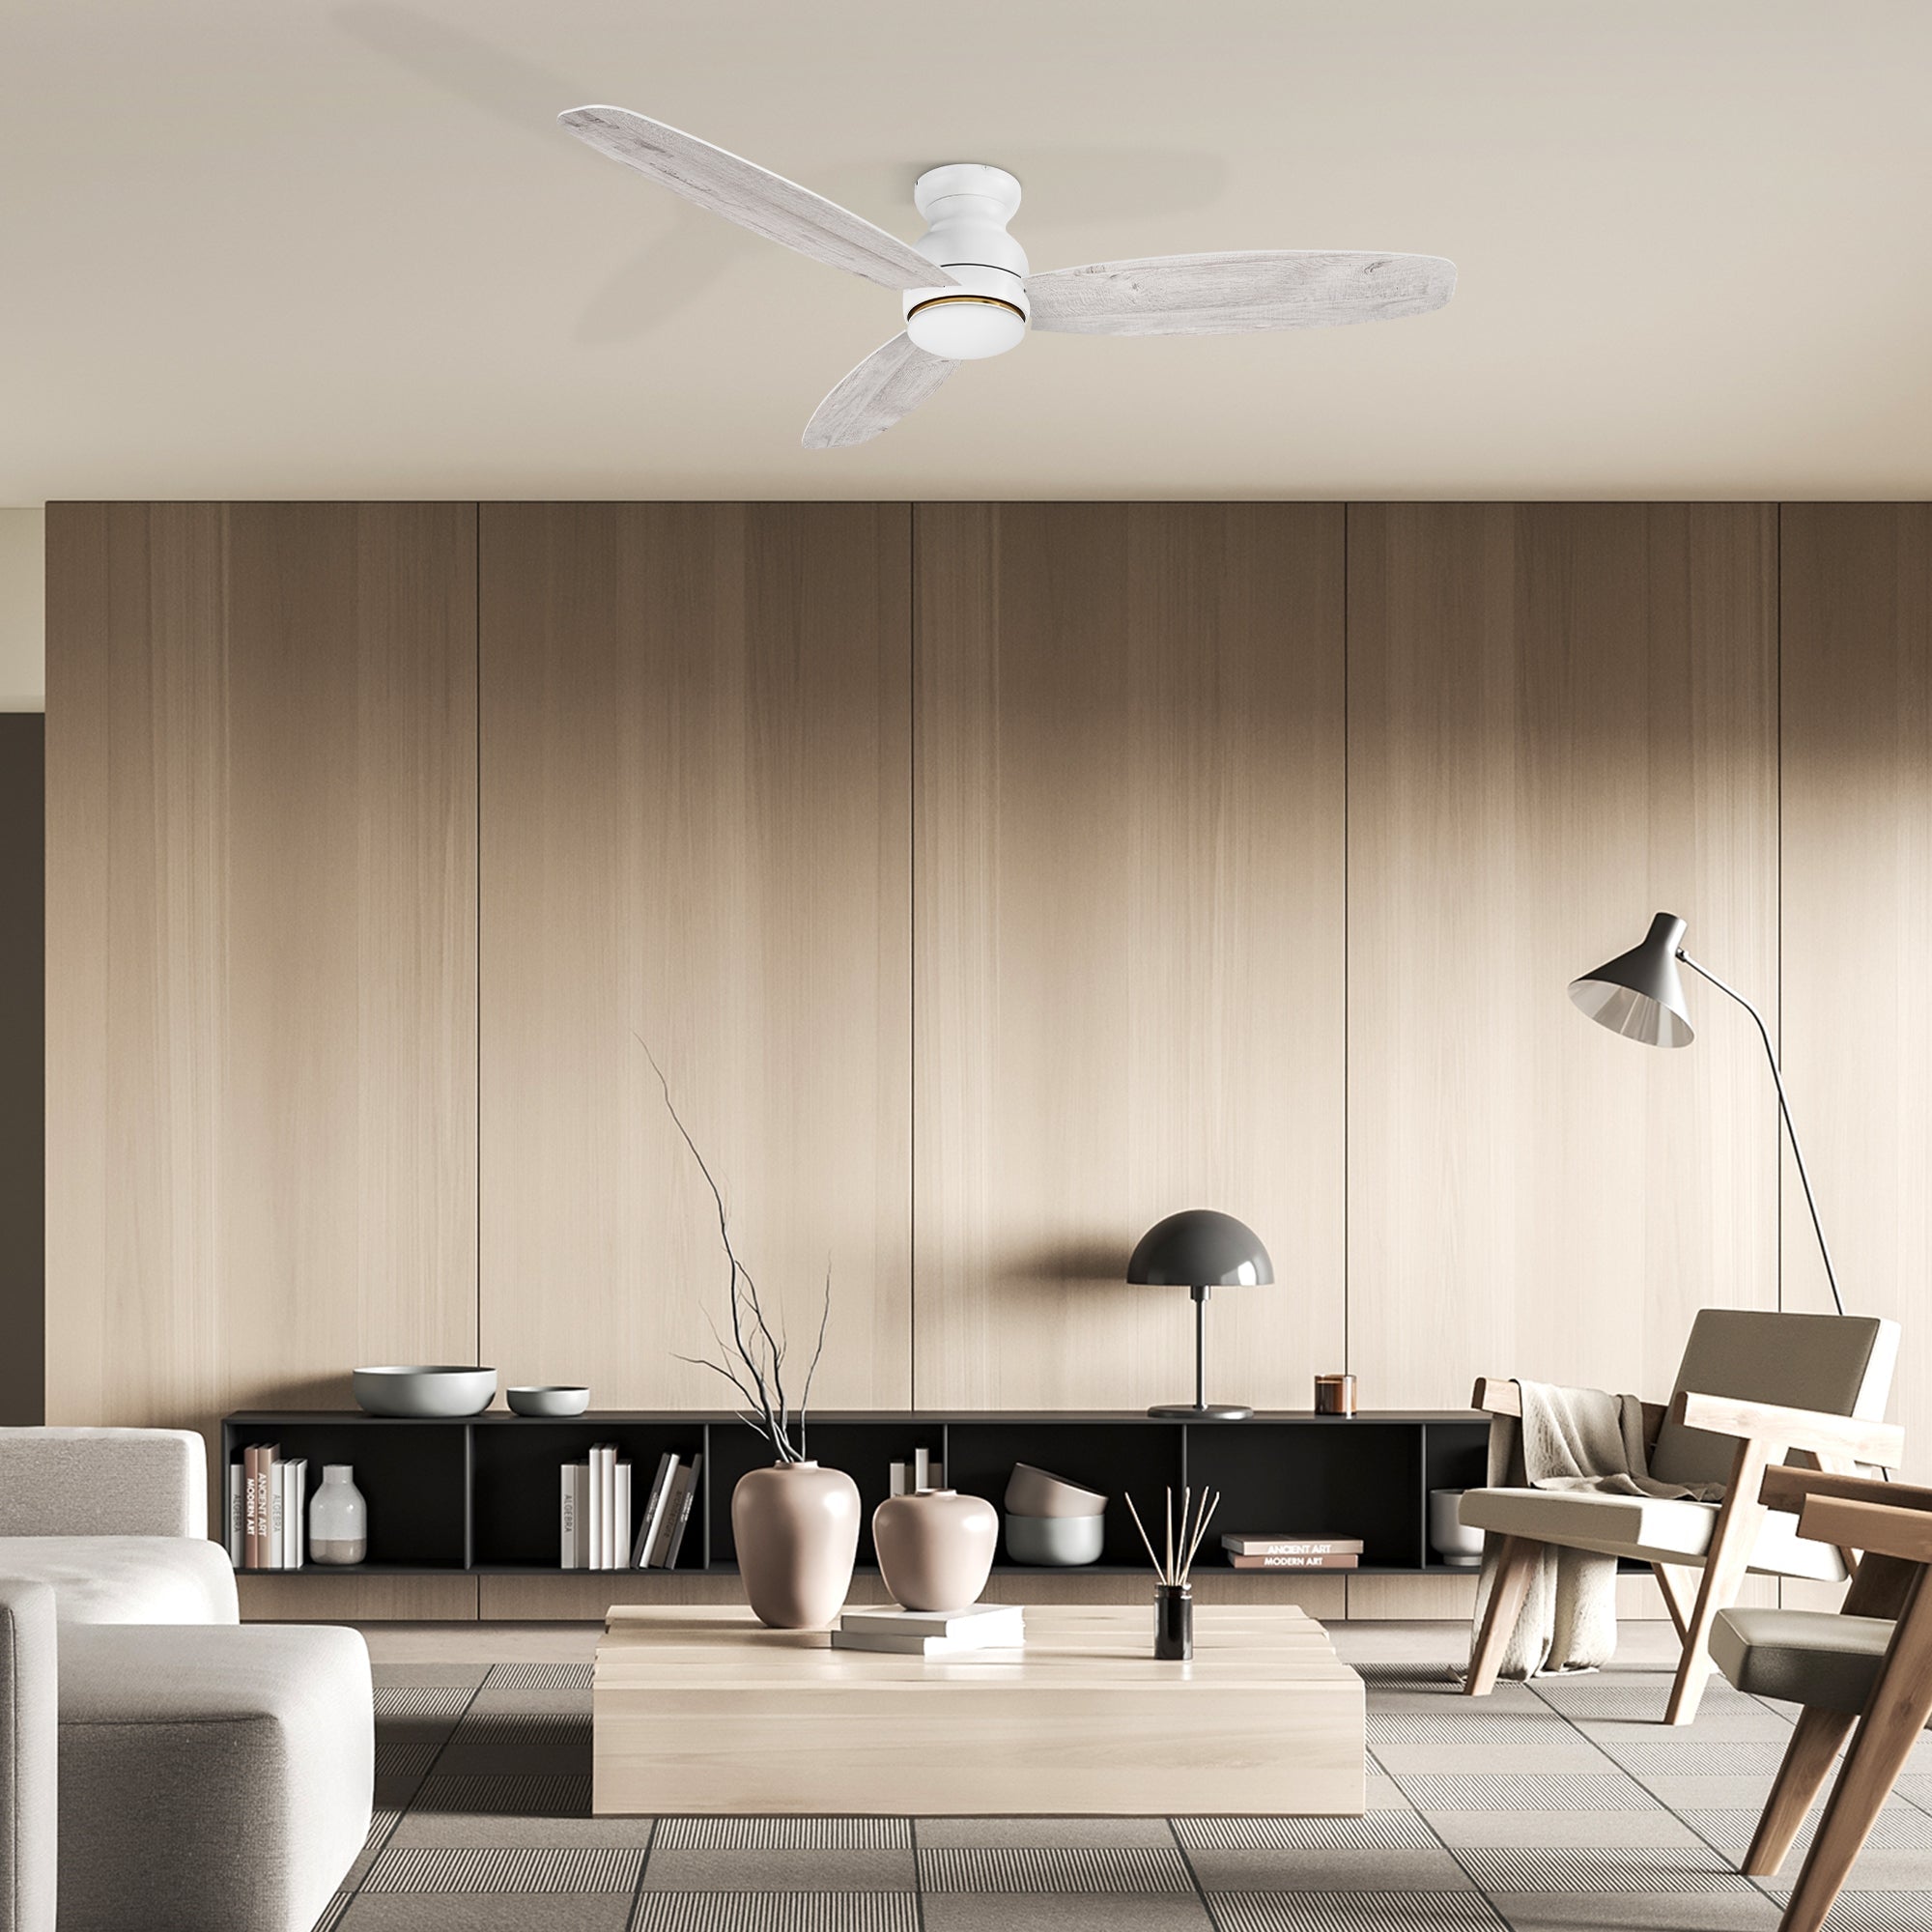 Create the home environment of your dreams with the versatile and powerful Arran 44 /48 /60 inches modern ceiling fan with lights! On the inside, The remote control ceiling fan features advanced motor and lighting technology for energy efficiency and precise control. On the outside, the Arran low profile ceiling fan features a sleek silhouette, elegant blades, and a timeless black or white finish for the ideal fit in any home interior! 